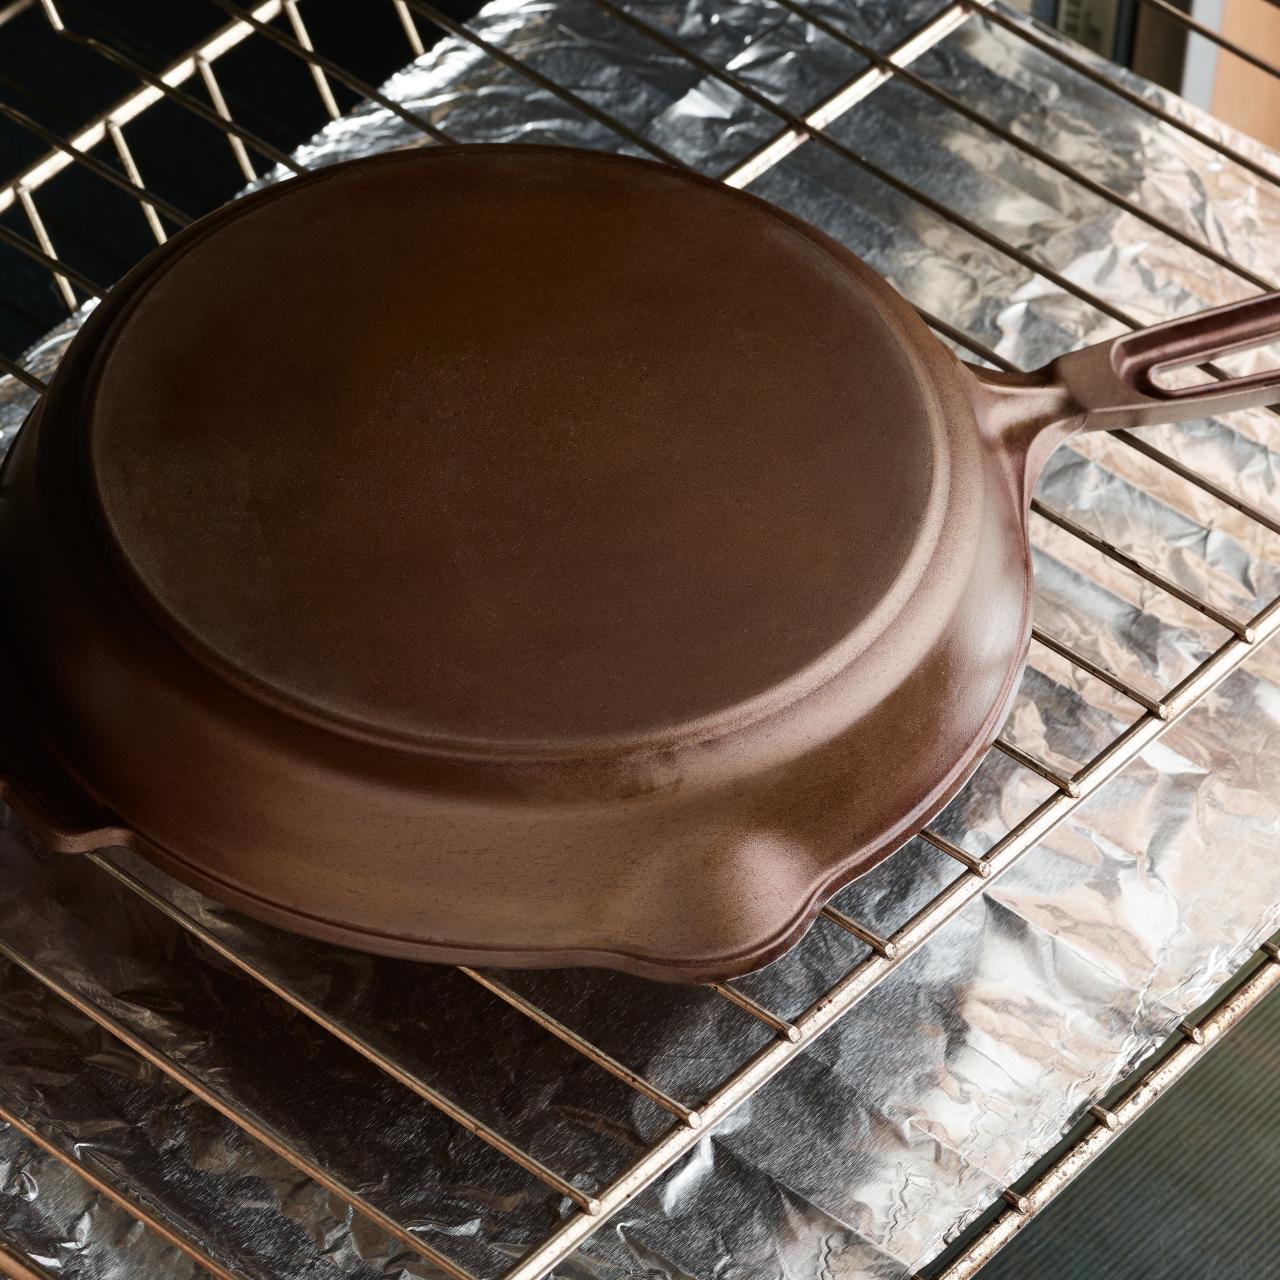 How To Season A Cast Iron Skillet | Cooking School | Food Network